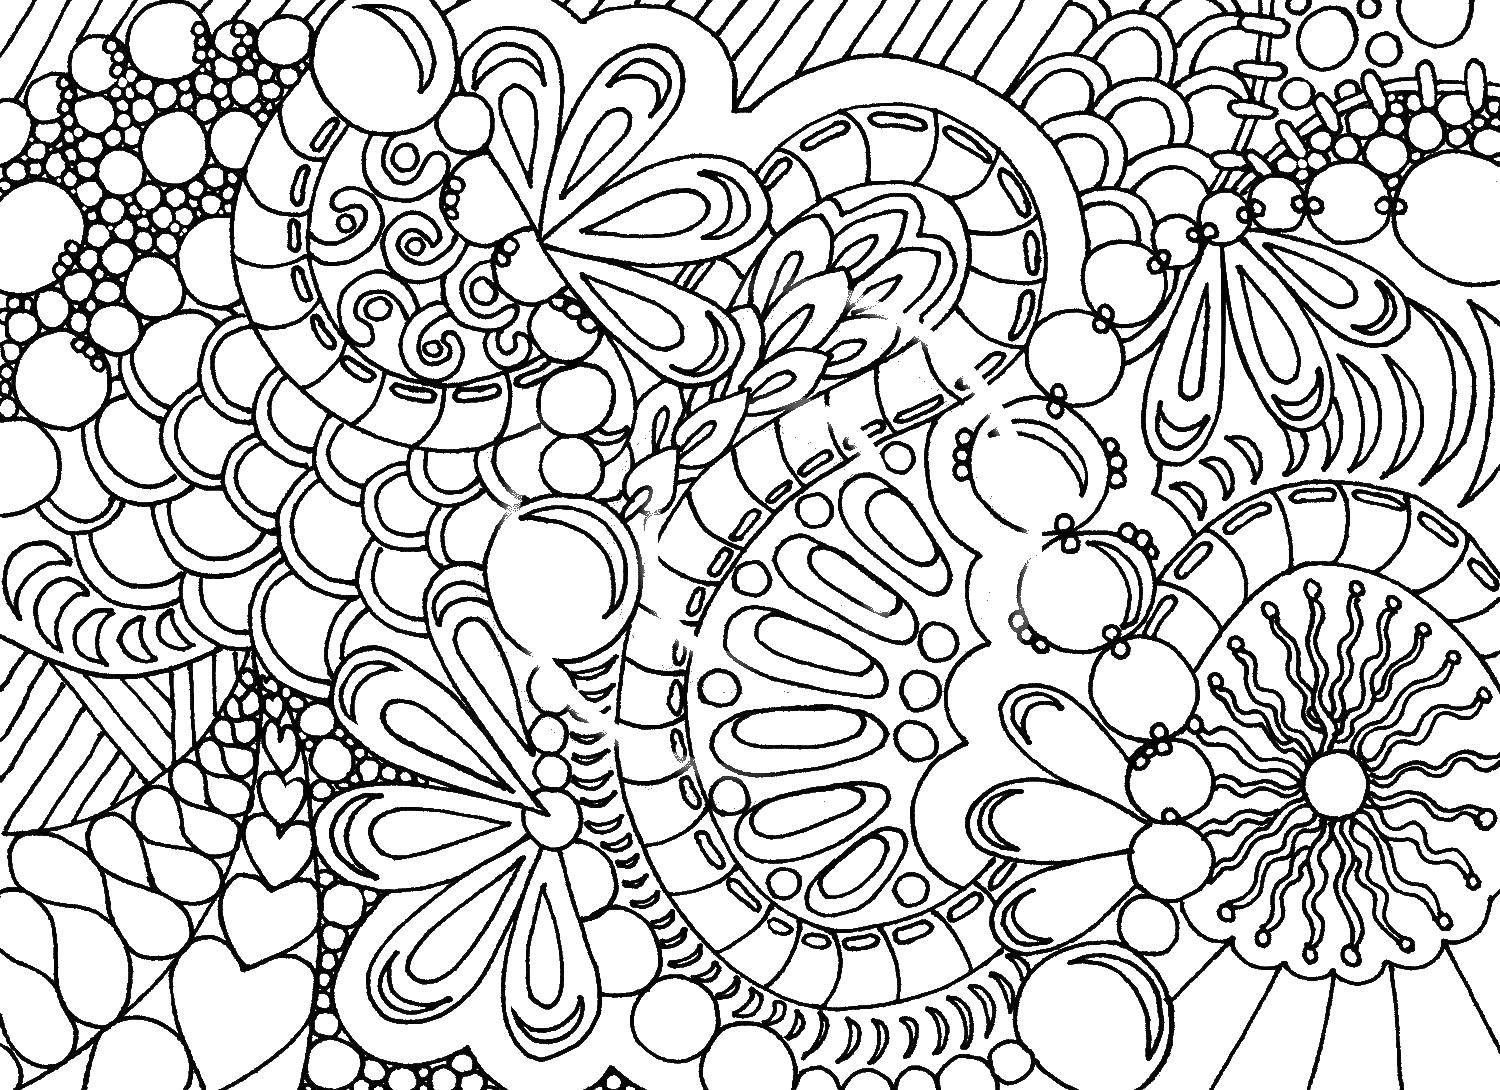 Coloring Unusual pattern. Category patterns. Tags:  Patterns, people.